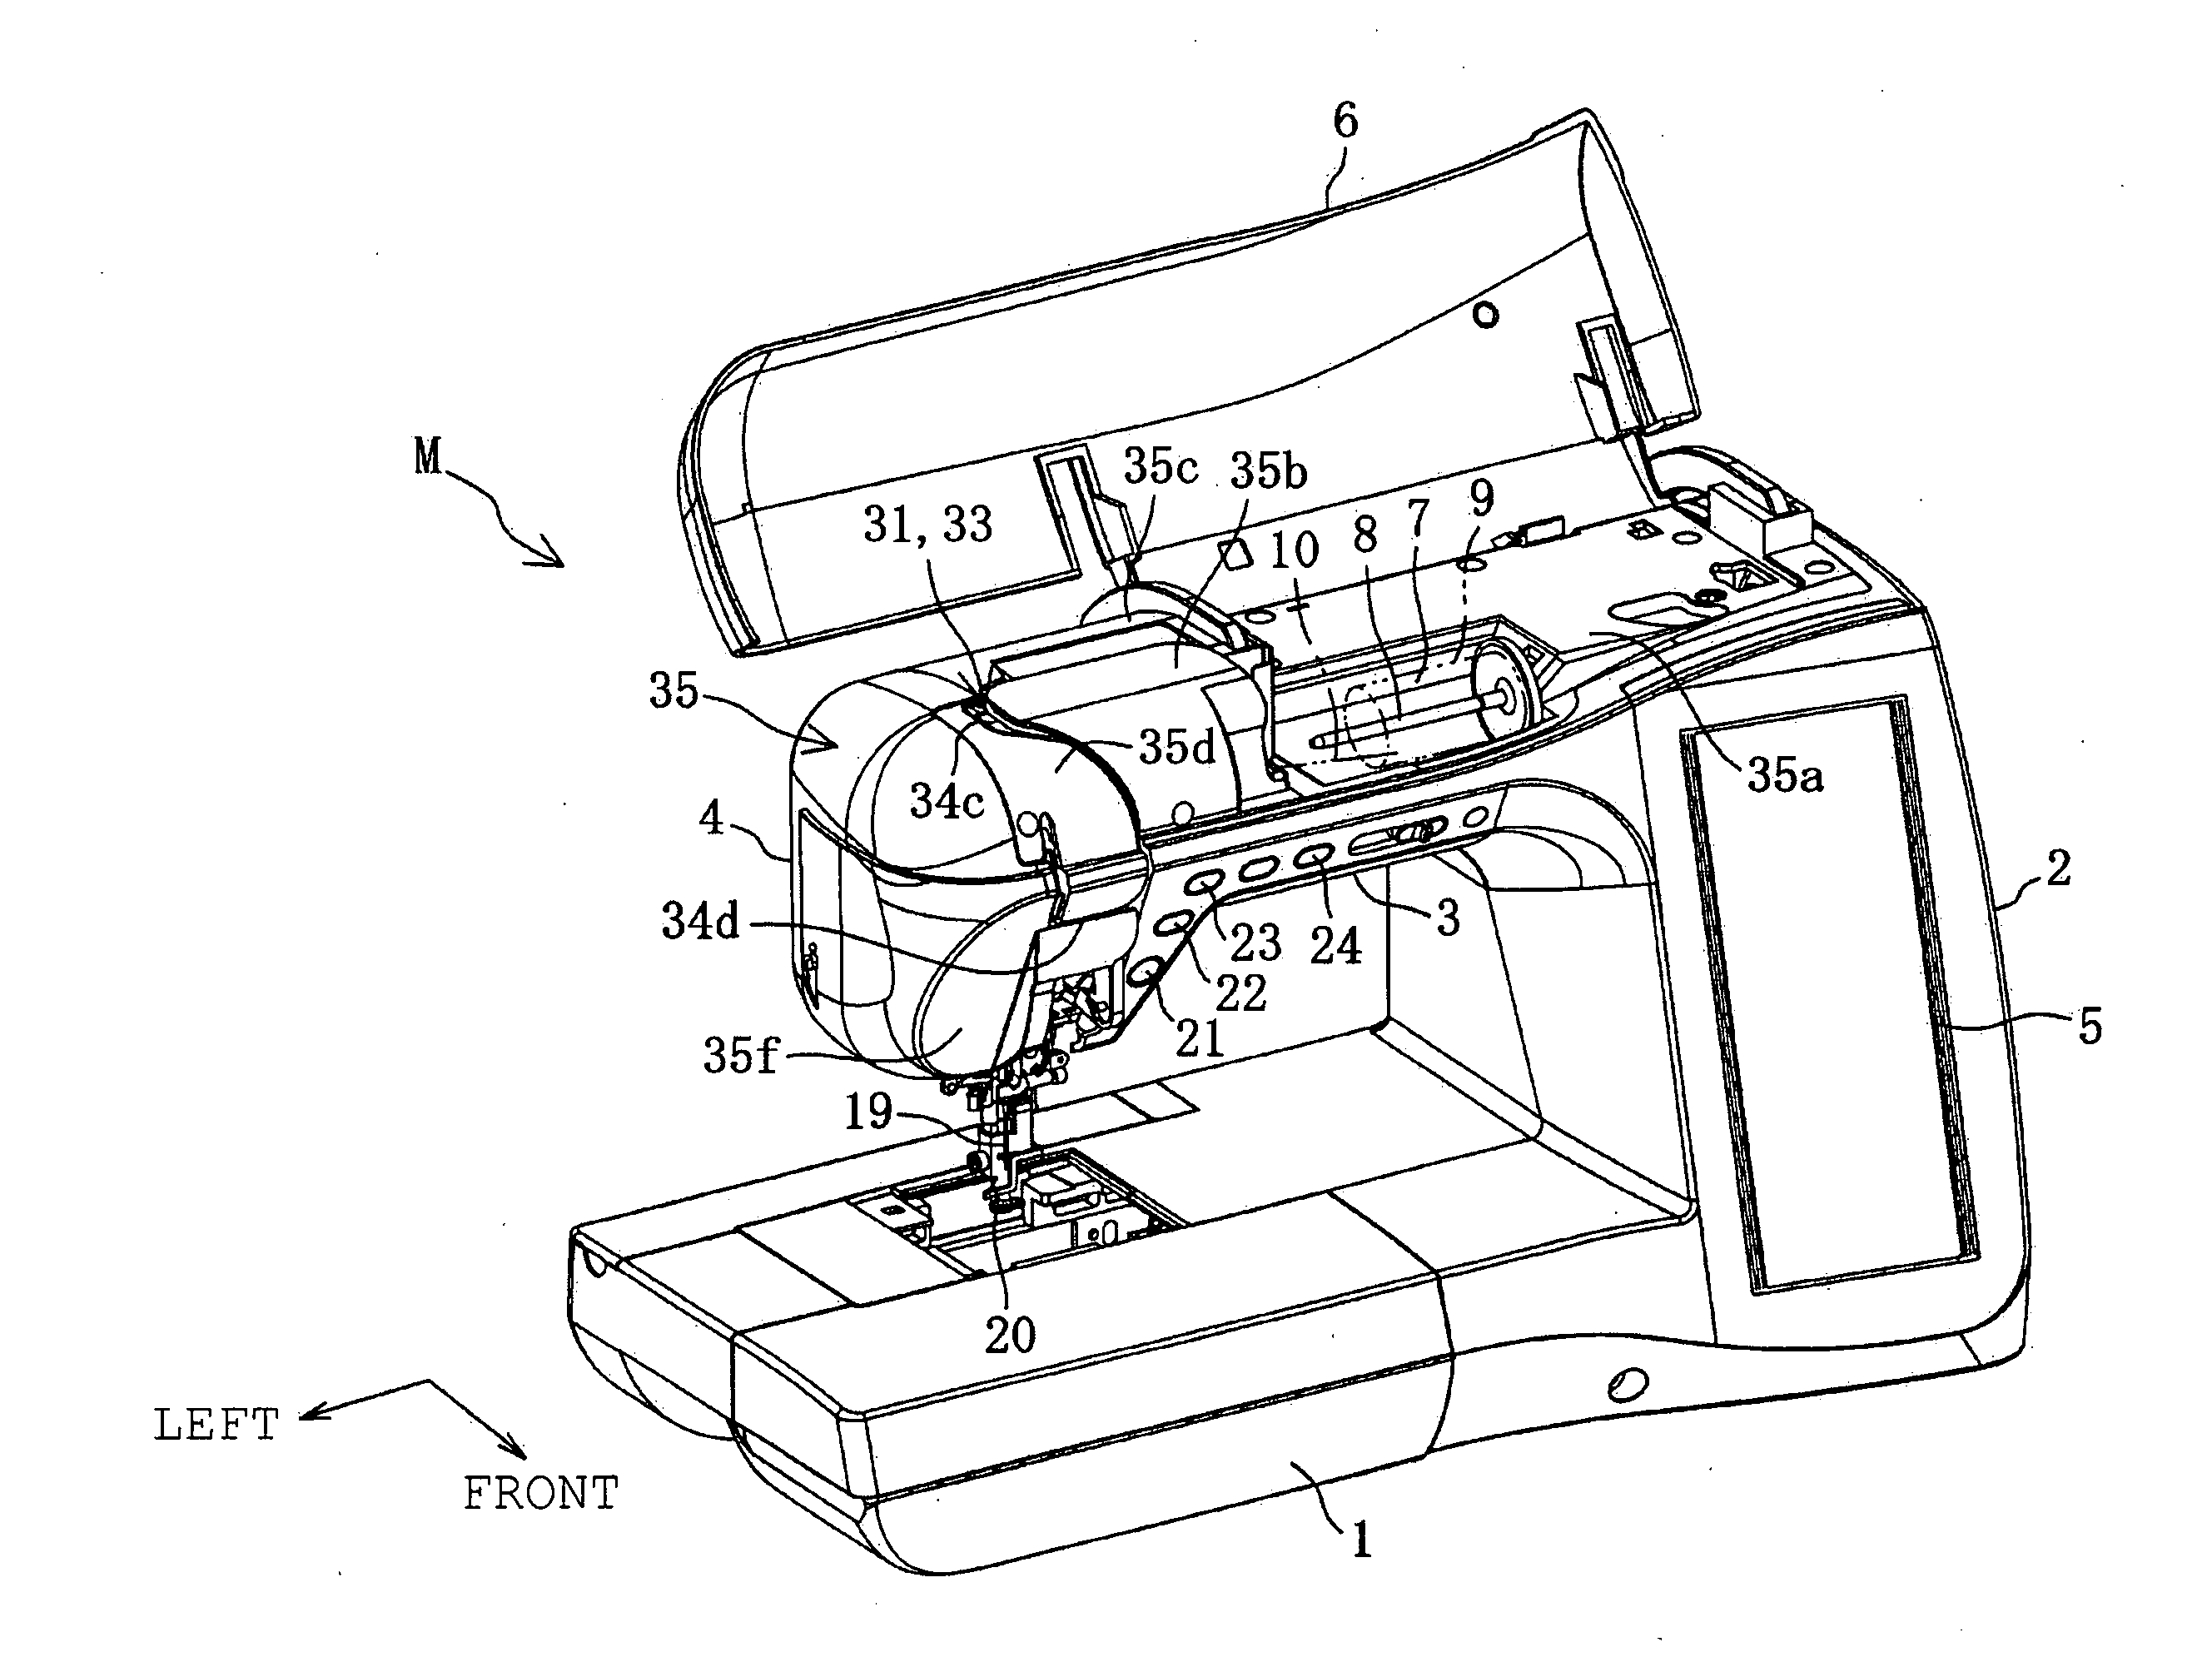 Sewing machine with automatic threading mechanism